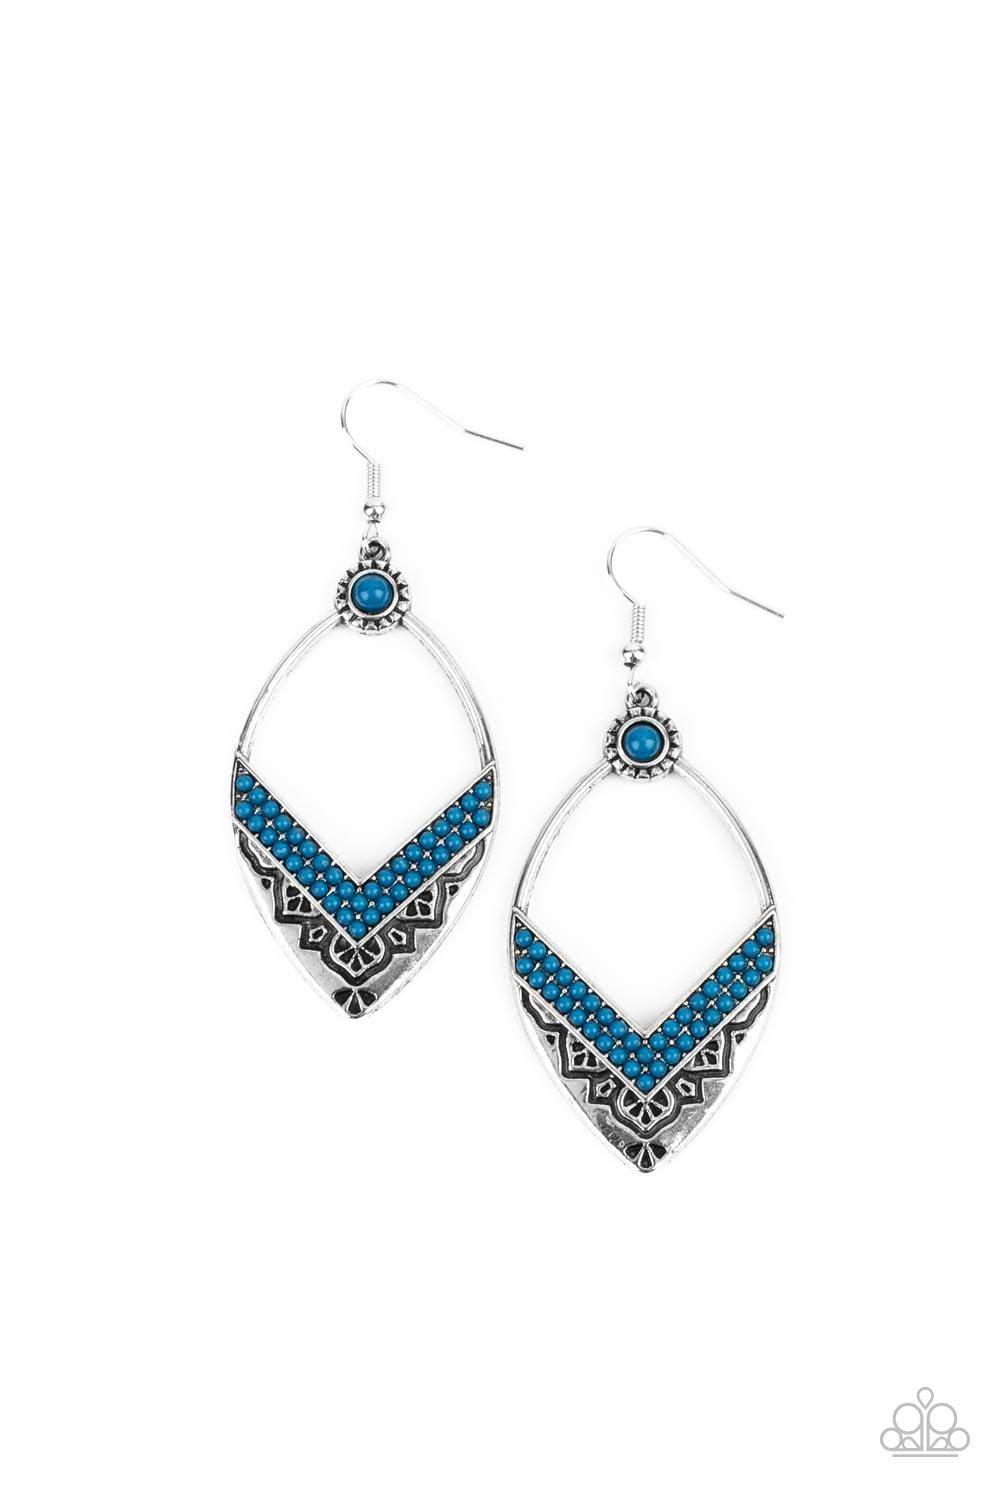 Paparazzi Accessories - Indigenous Intentions - Blue Earrings - Bling by JessieK